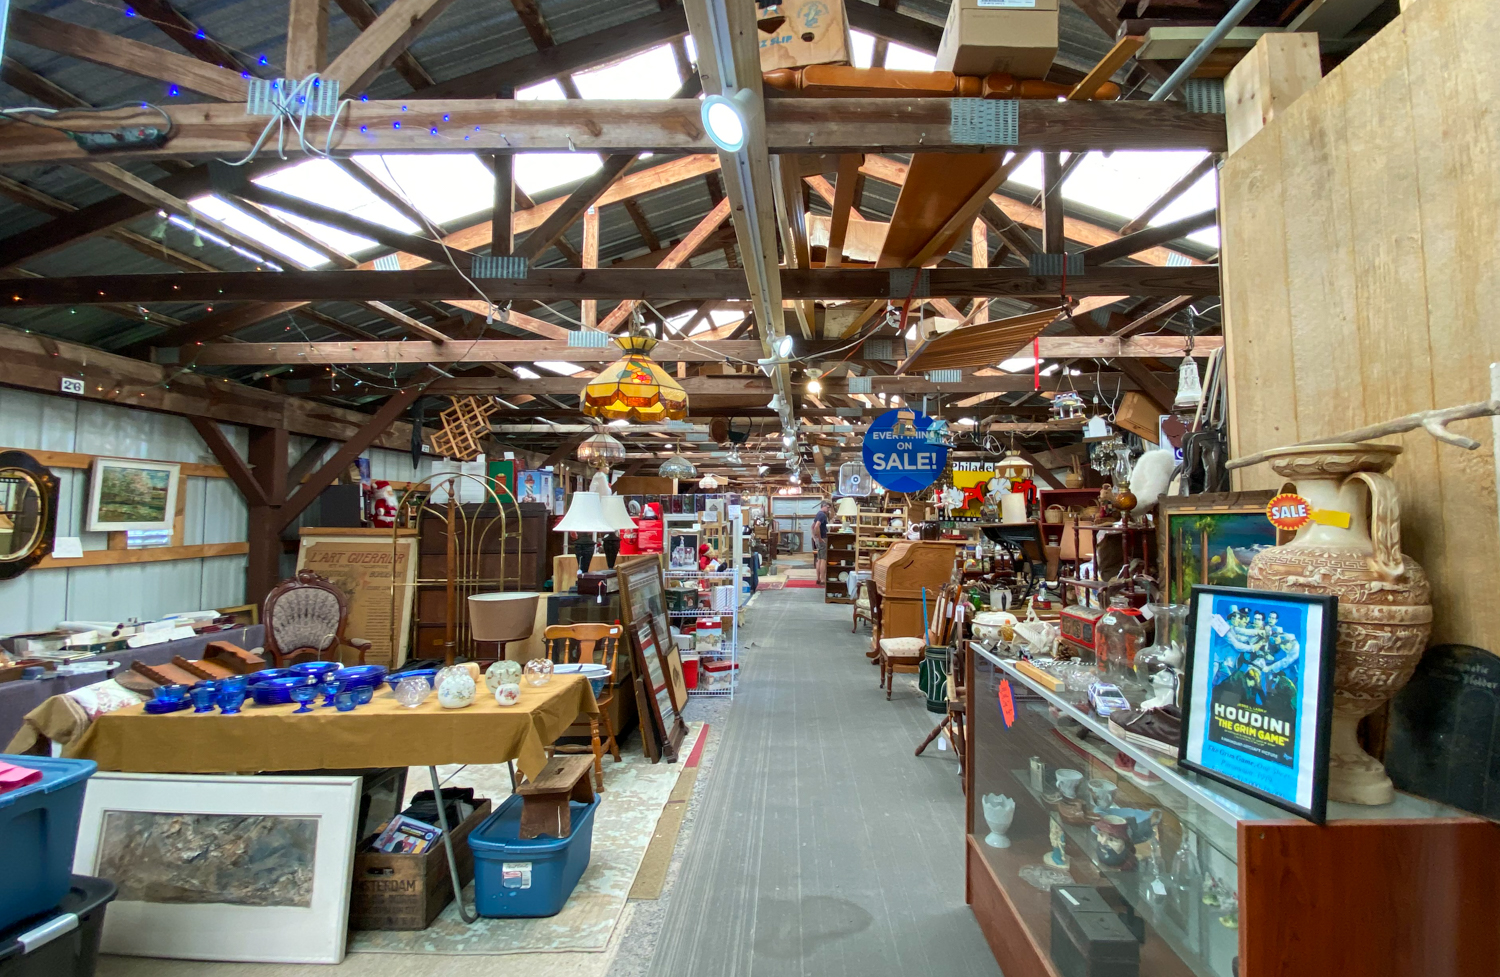 How Bouckville Became The Antiques Center Of Upstate Exploring Upstate